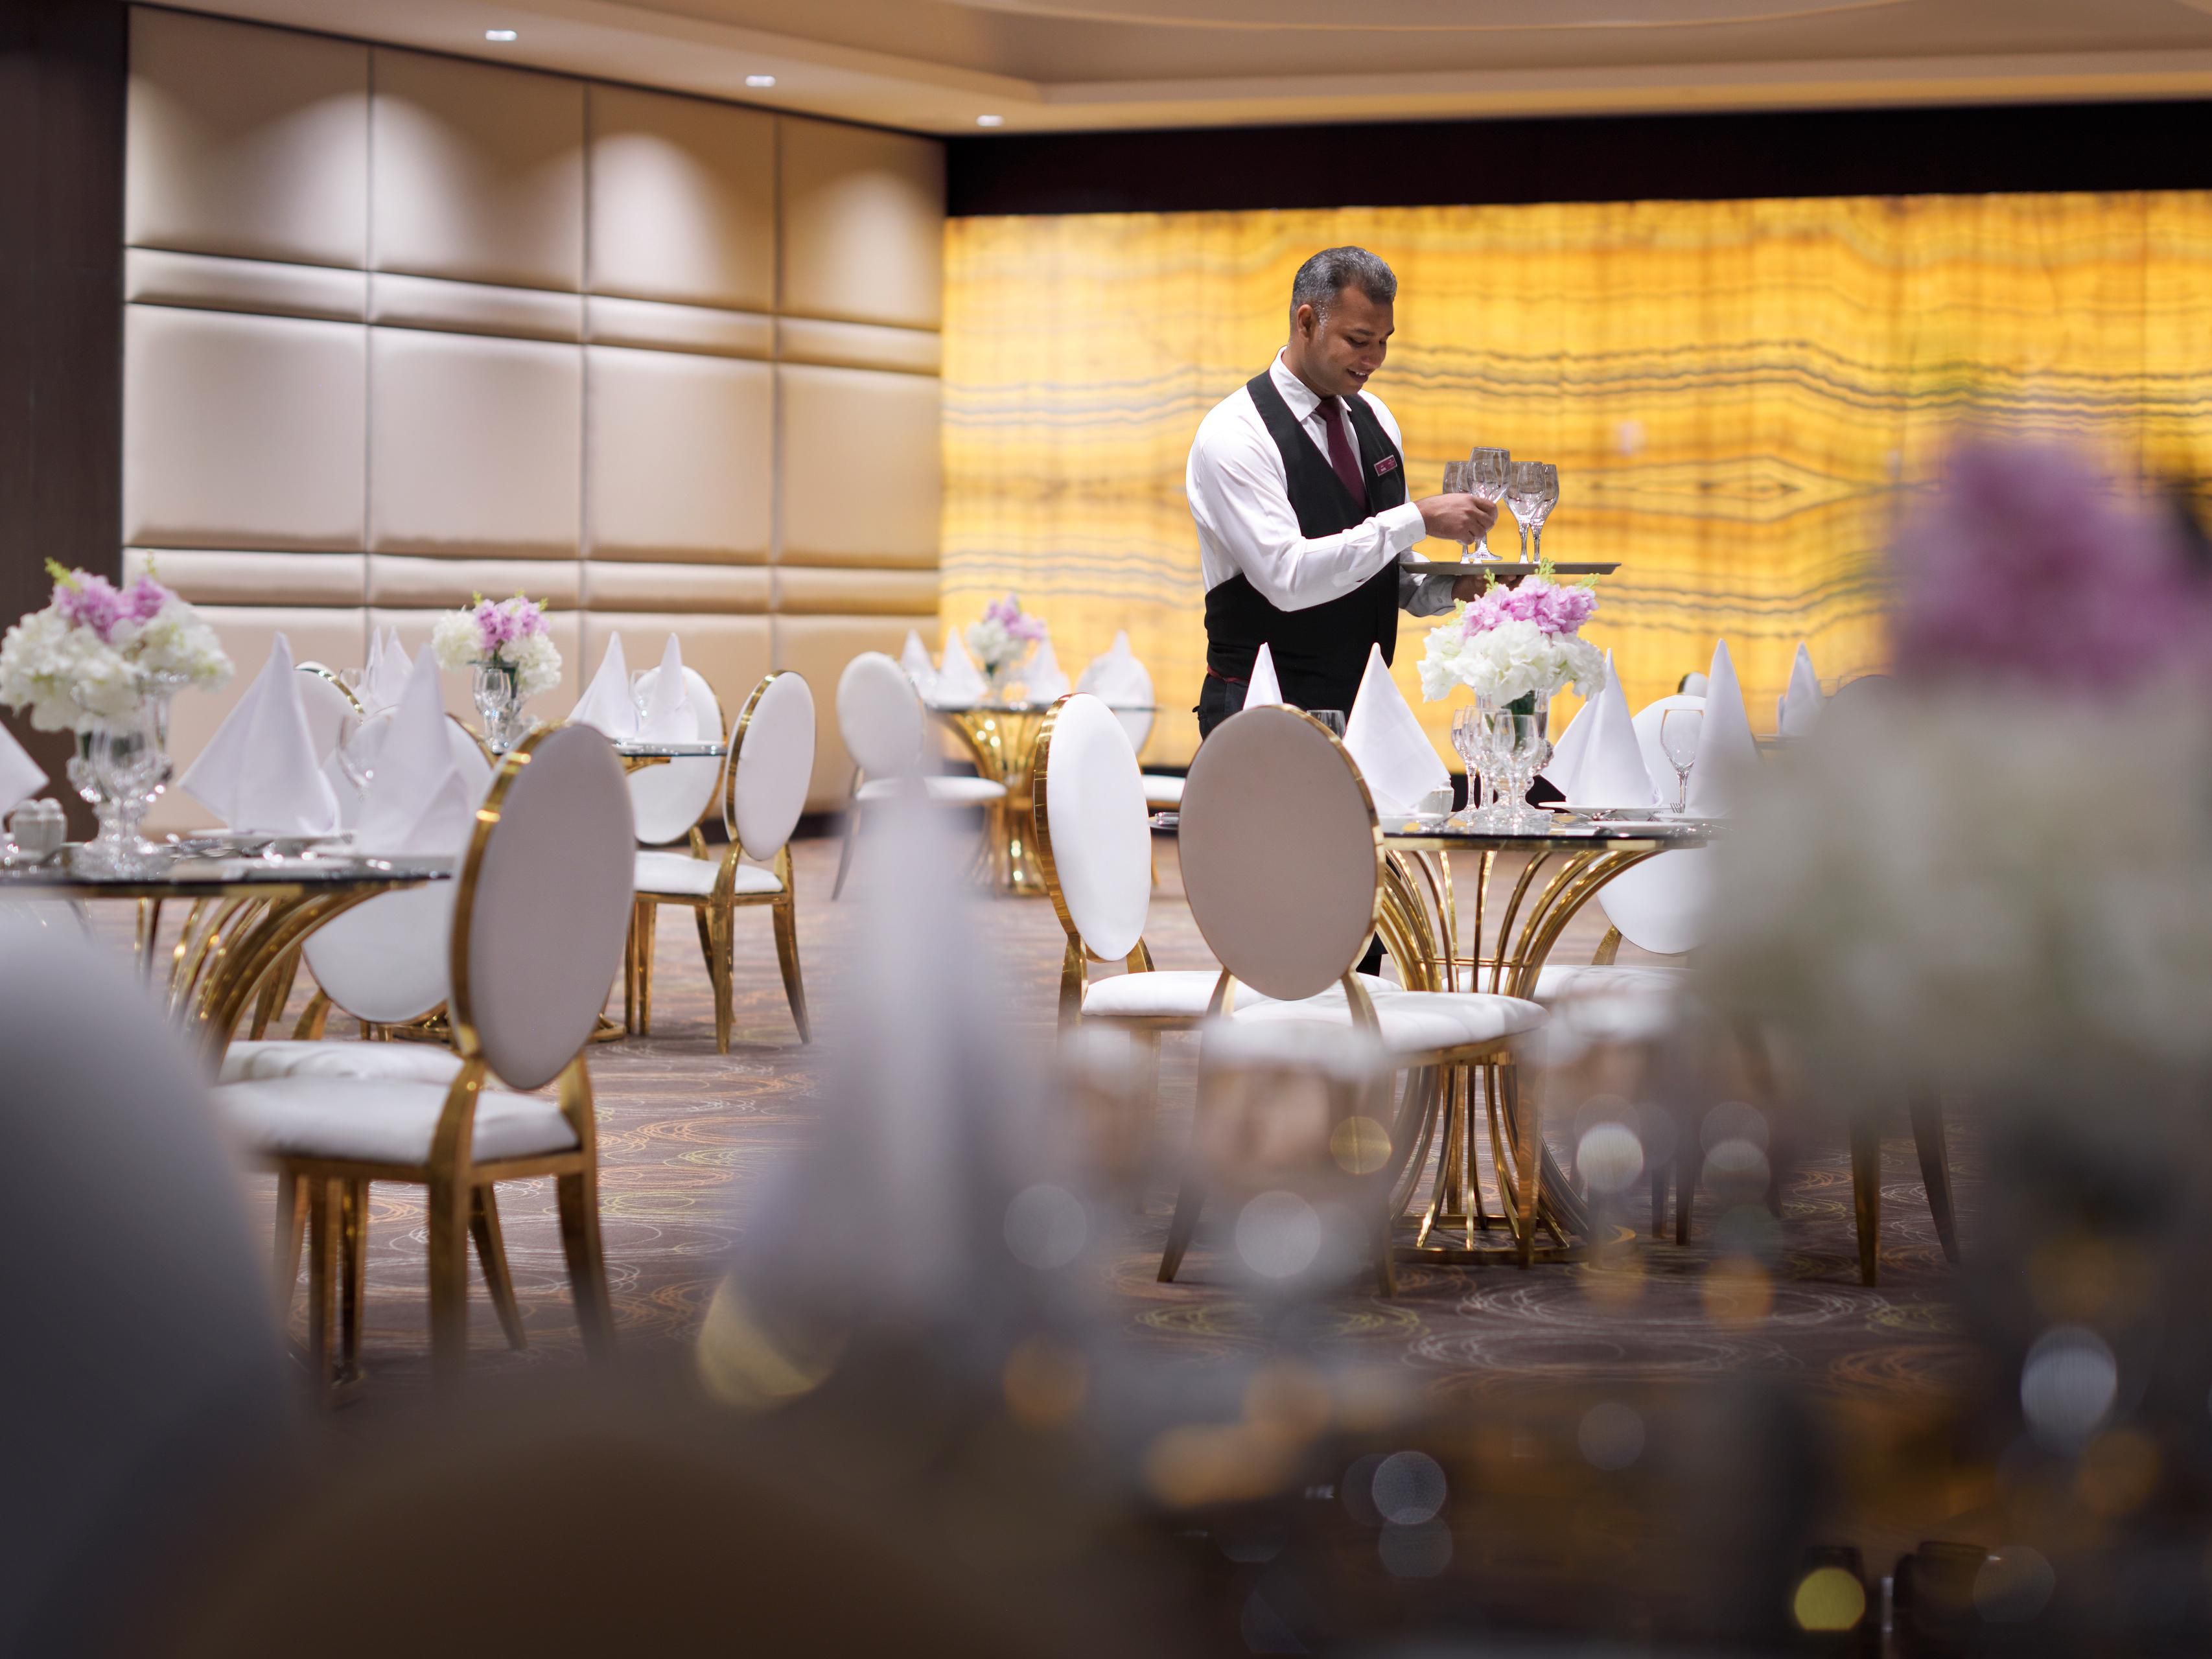 Focus on your business. Leave the rest to us. Organize your meeting at your favorite venue and let us cater to your event reflecting our Crowne Plaza Meeting Standards. We strive to deliver an unforgettable experience through personalized services, a tempting choice of menus, customized arrangements, premium equipment and attention to detail.